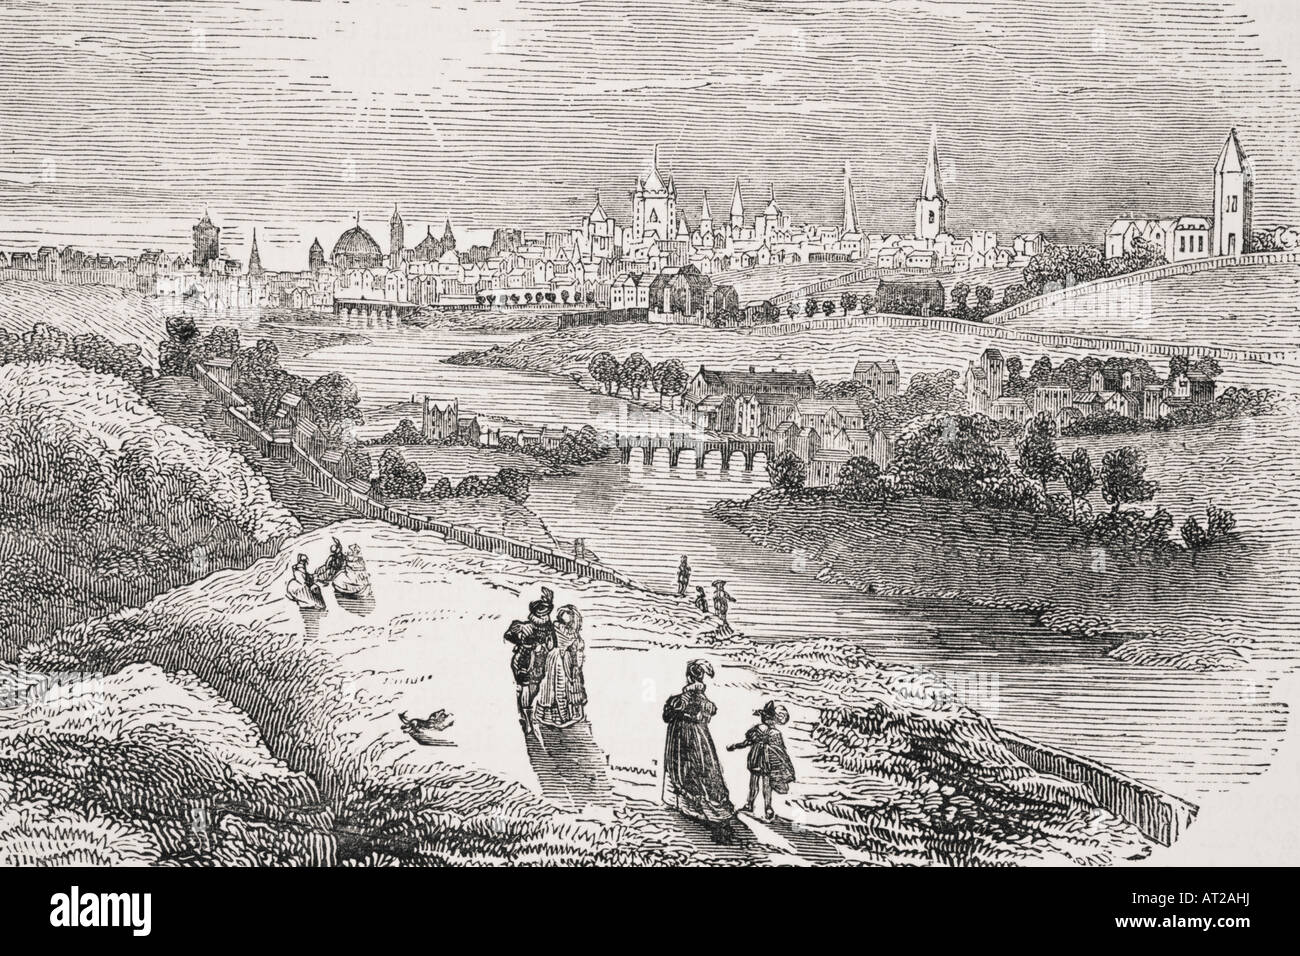 View of Dublin, Ireland in the 17th century. Stock Photo